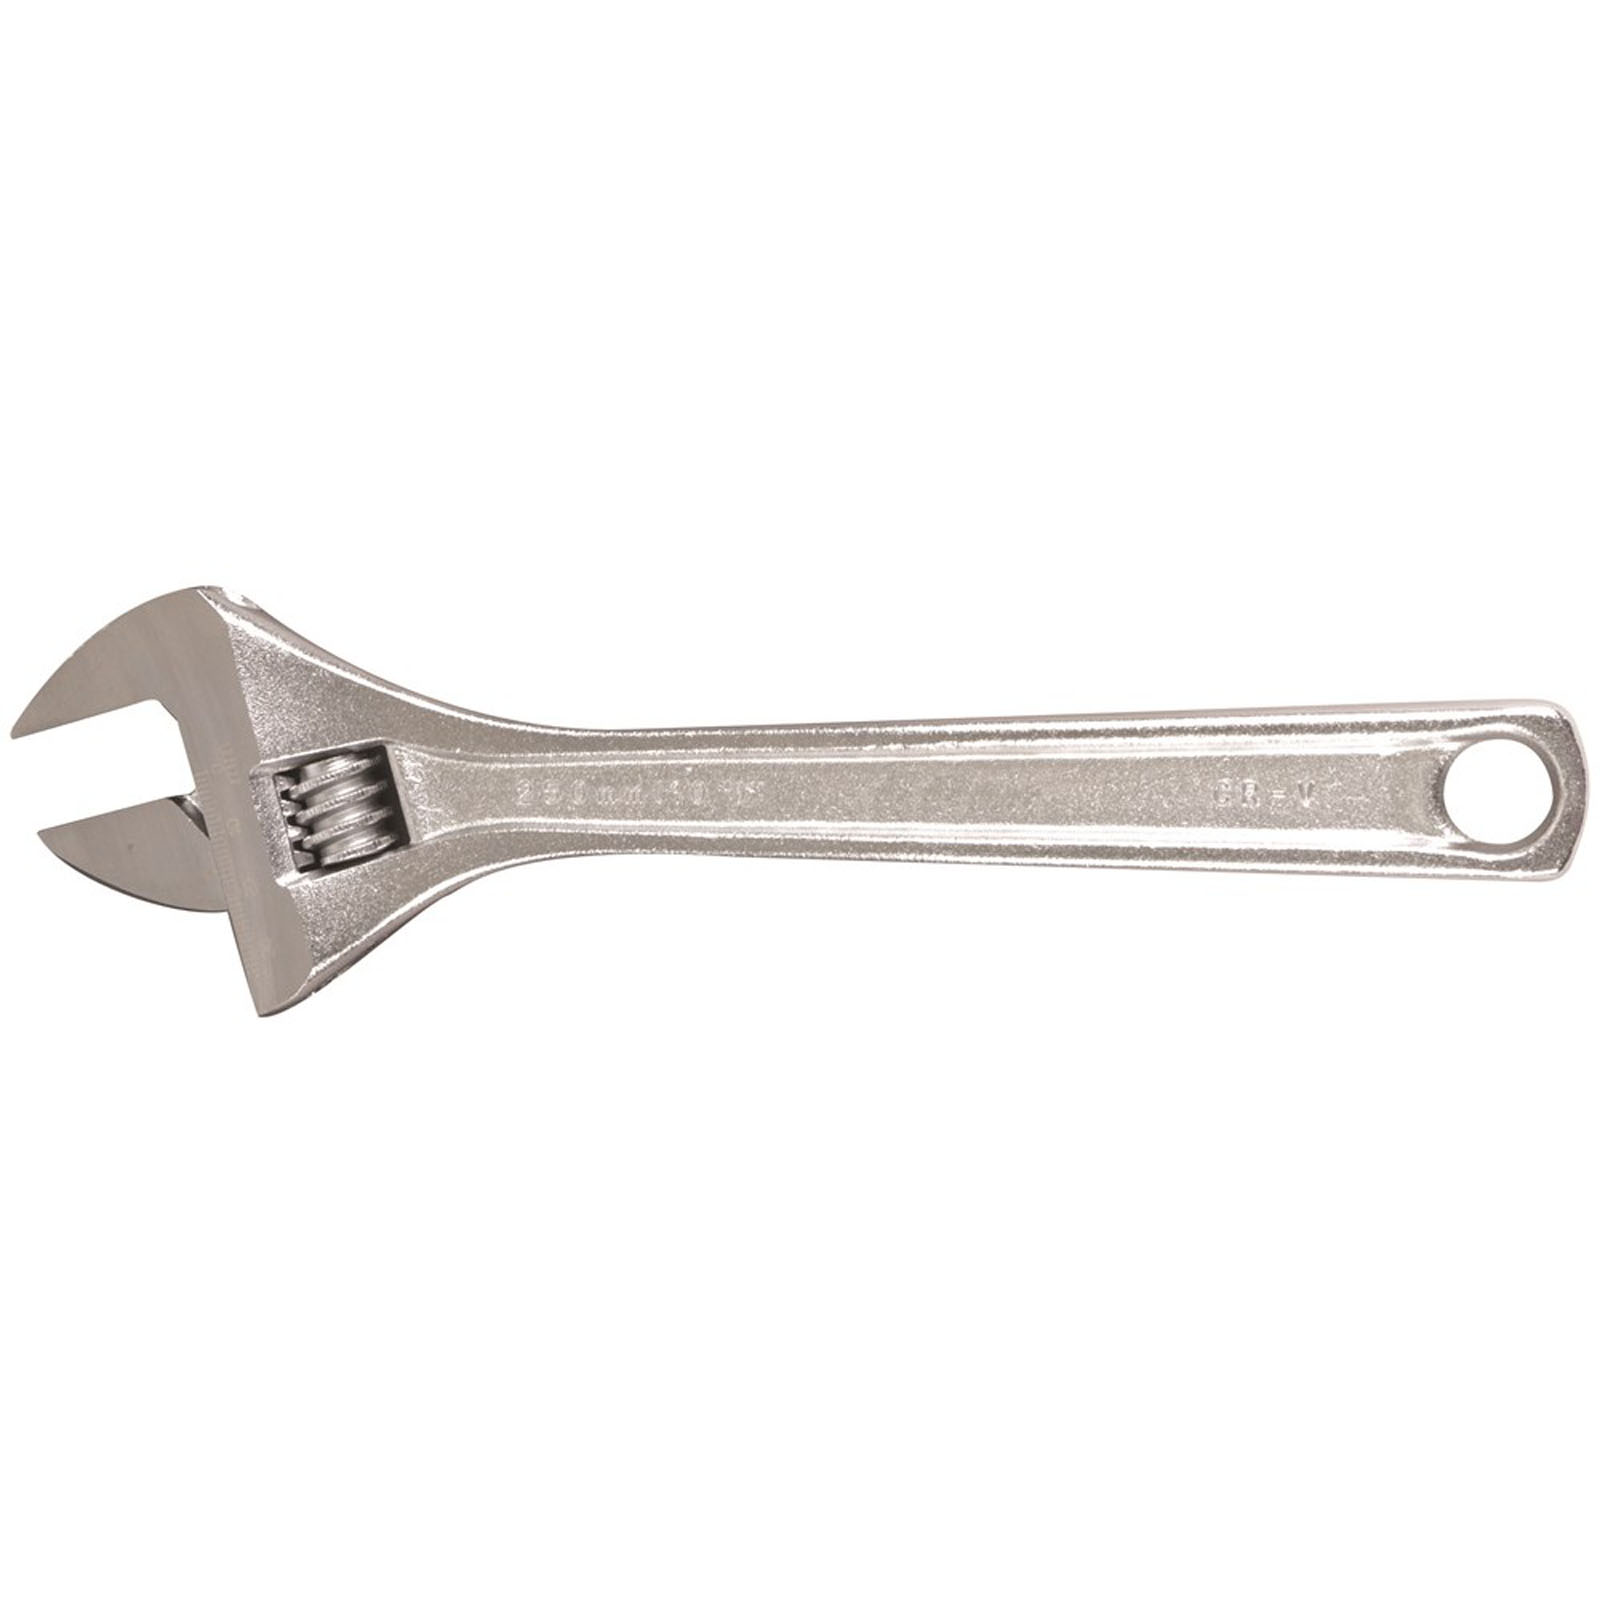 Adjustable Wrench 200mm (8